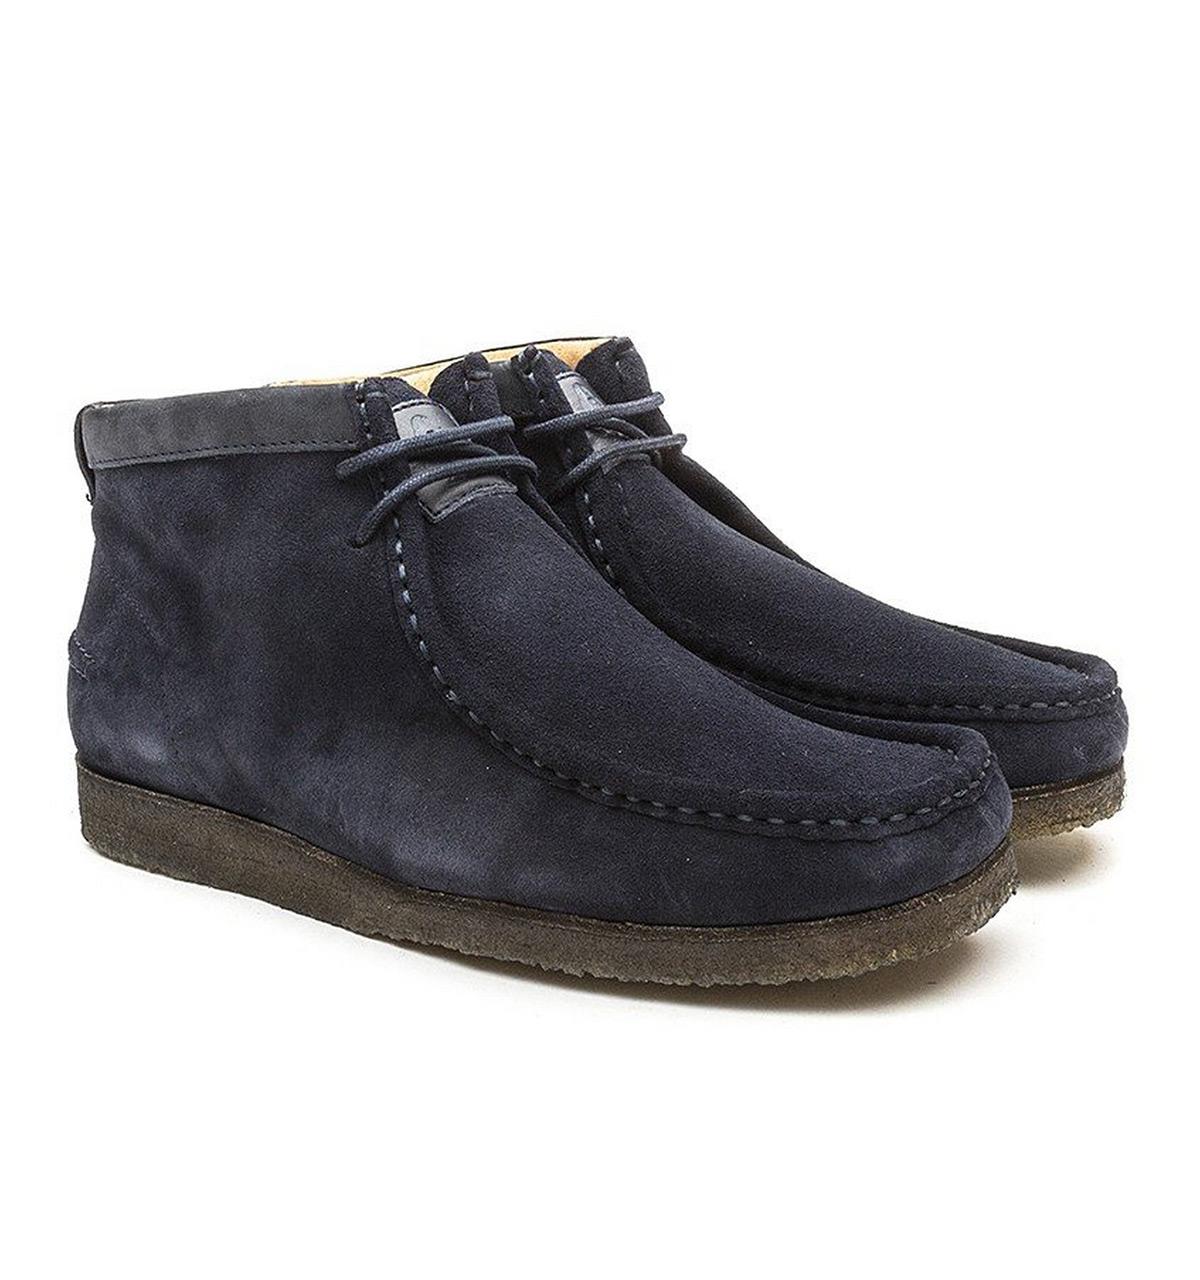 Lyst - Hush Puppies Davenport High Navy Suede Chukka Boots in Blue for Men